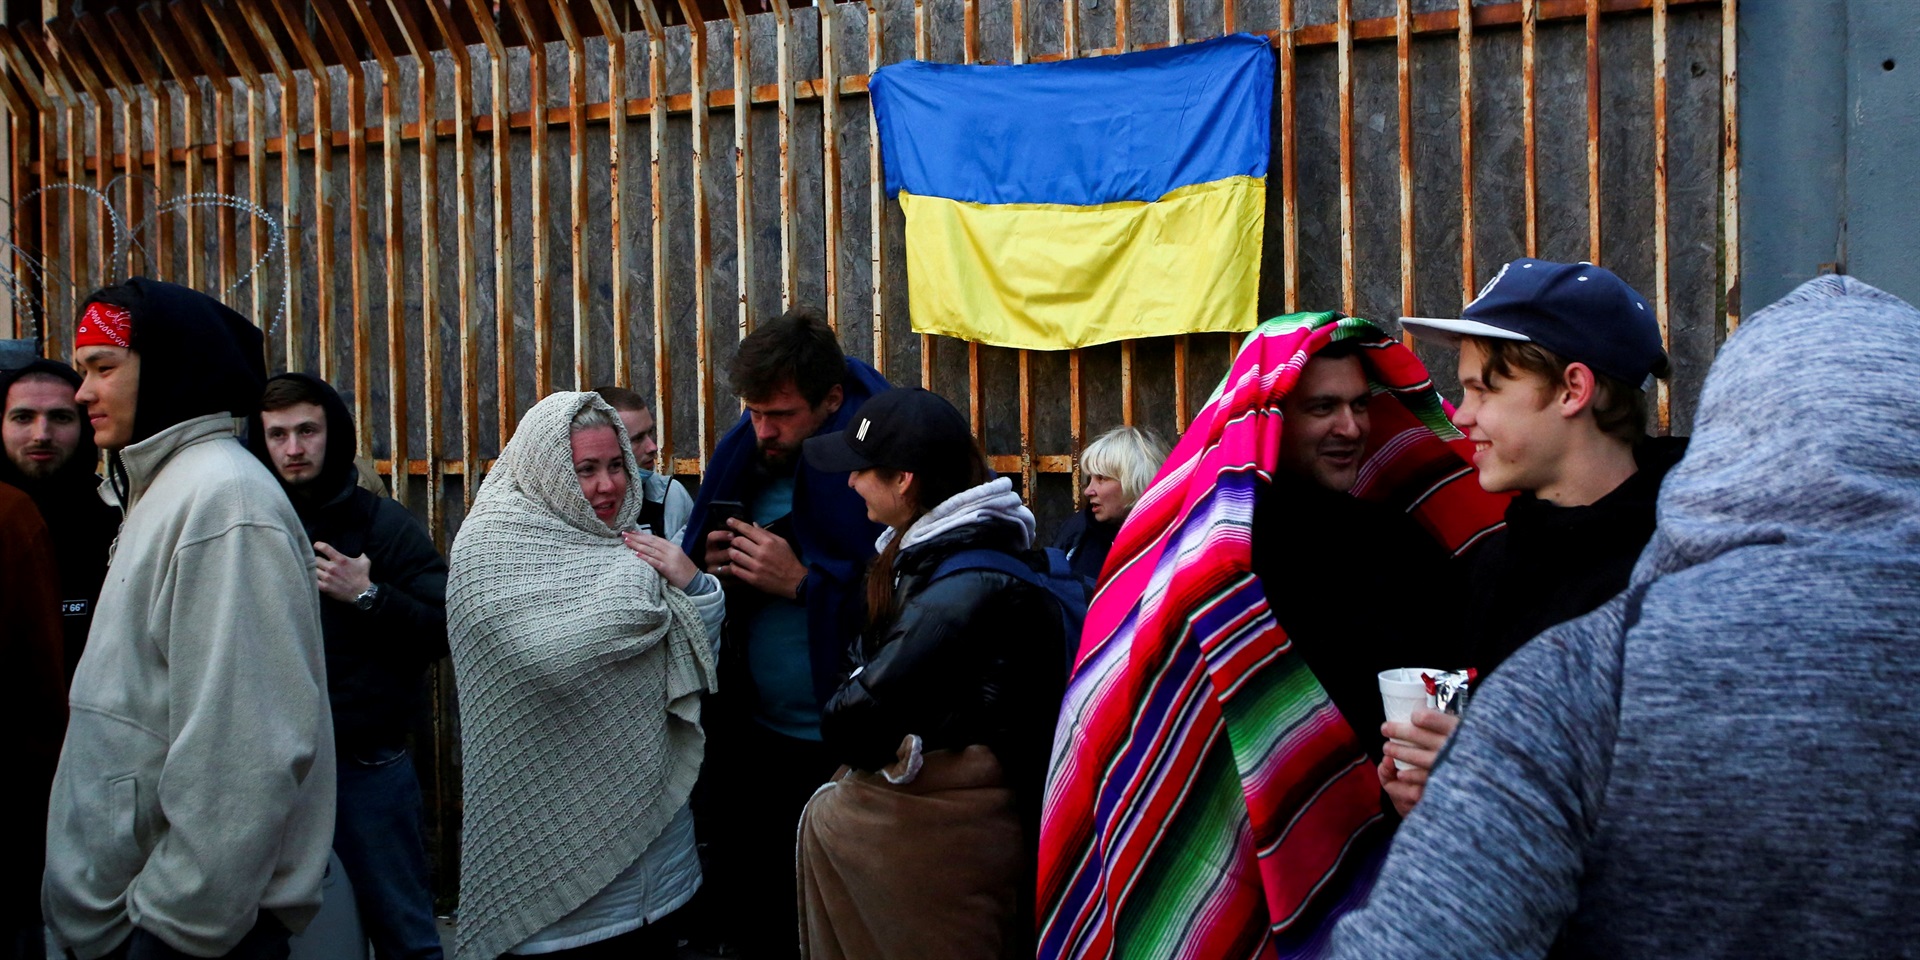 Ukrainians who recently arrived to Mexico camp out to try to get into the U.S. at the San Ysidro Port of Entry of the U.S.-Mexico border, in Tijuana, Mexico